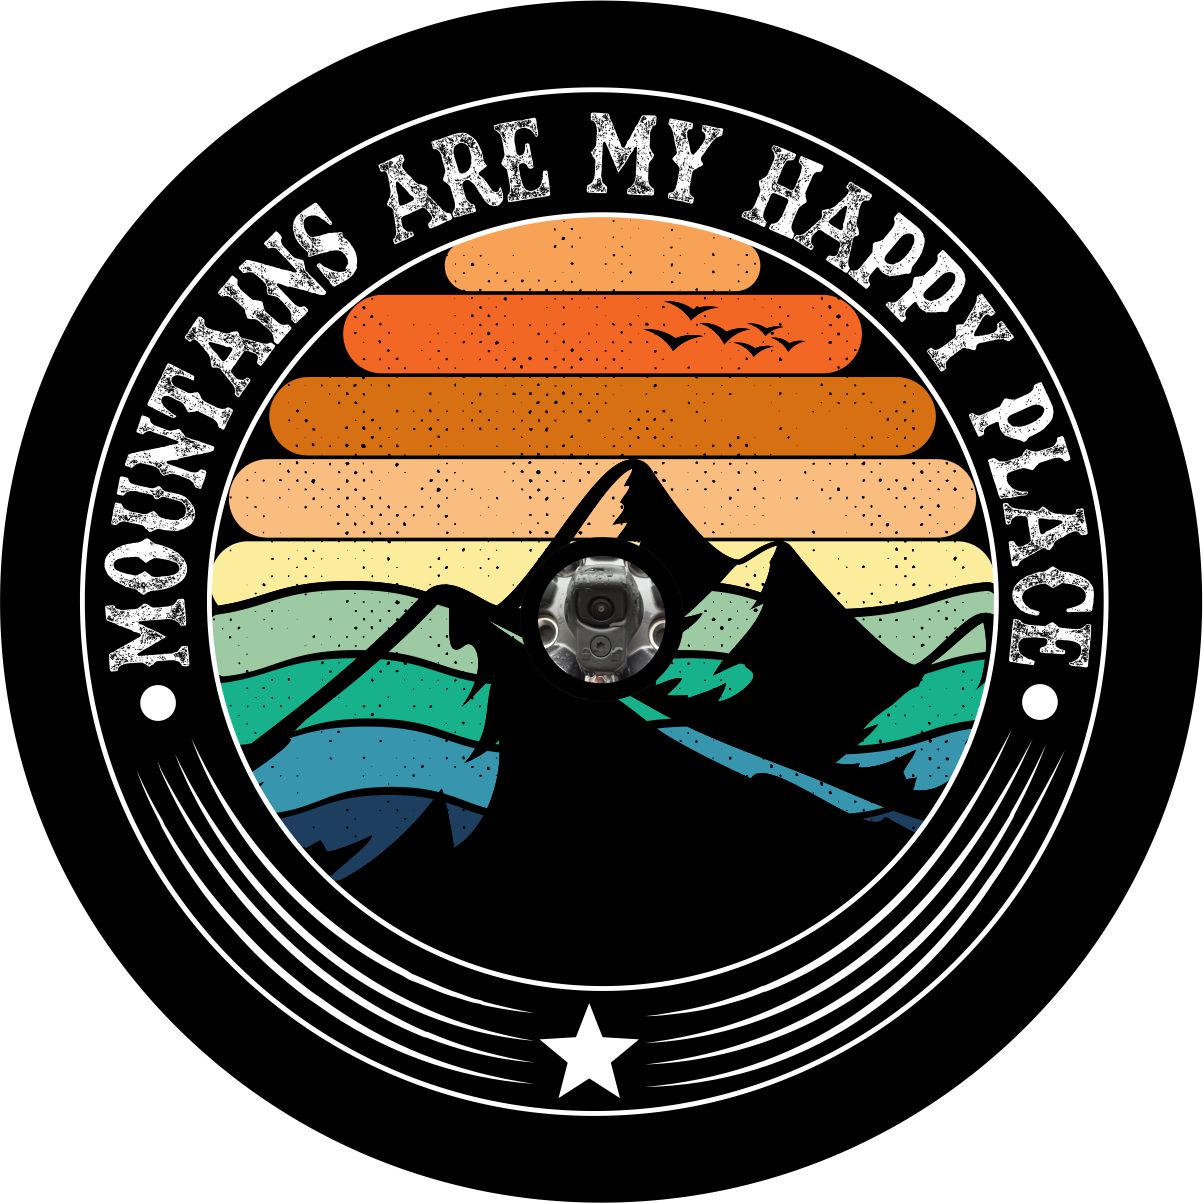 Multi-colored striped background with a mountain silhouette spare tire cover and the saying, "mountains are my happy place" written around the edge spare tire cover design with a back up camera hole